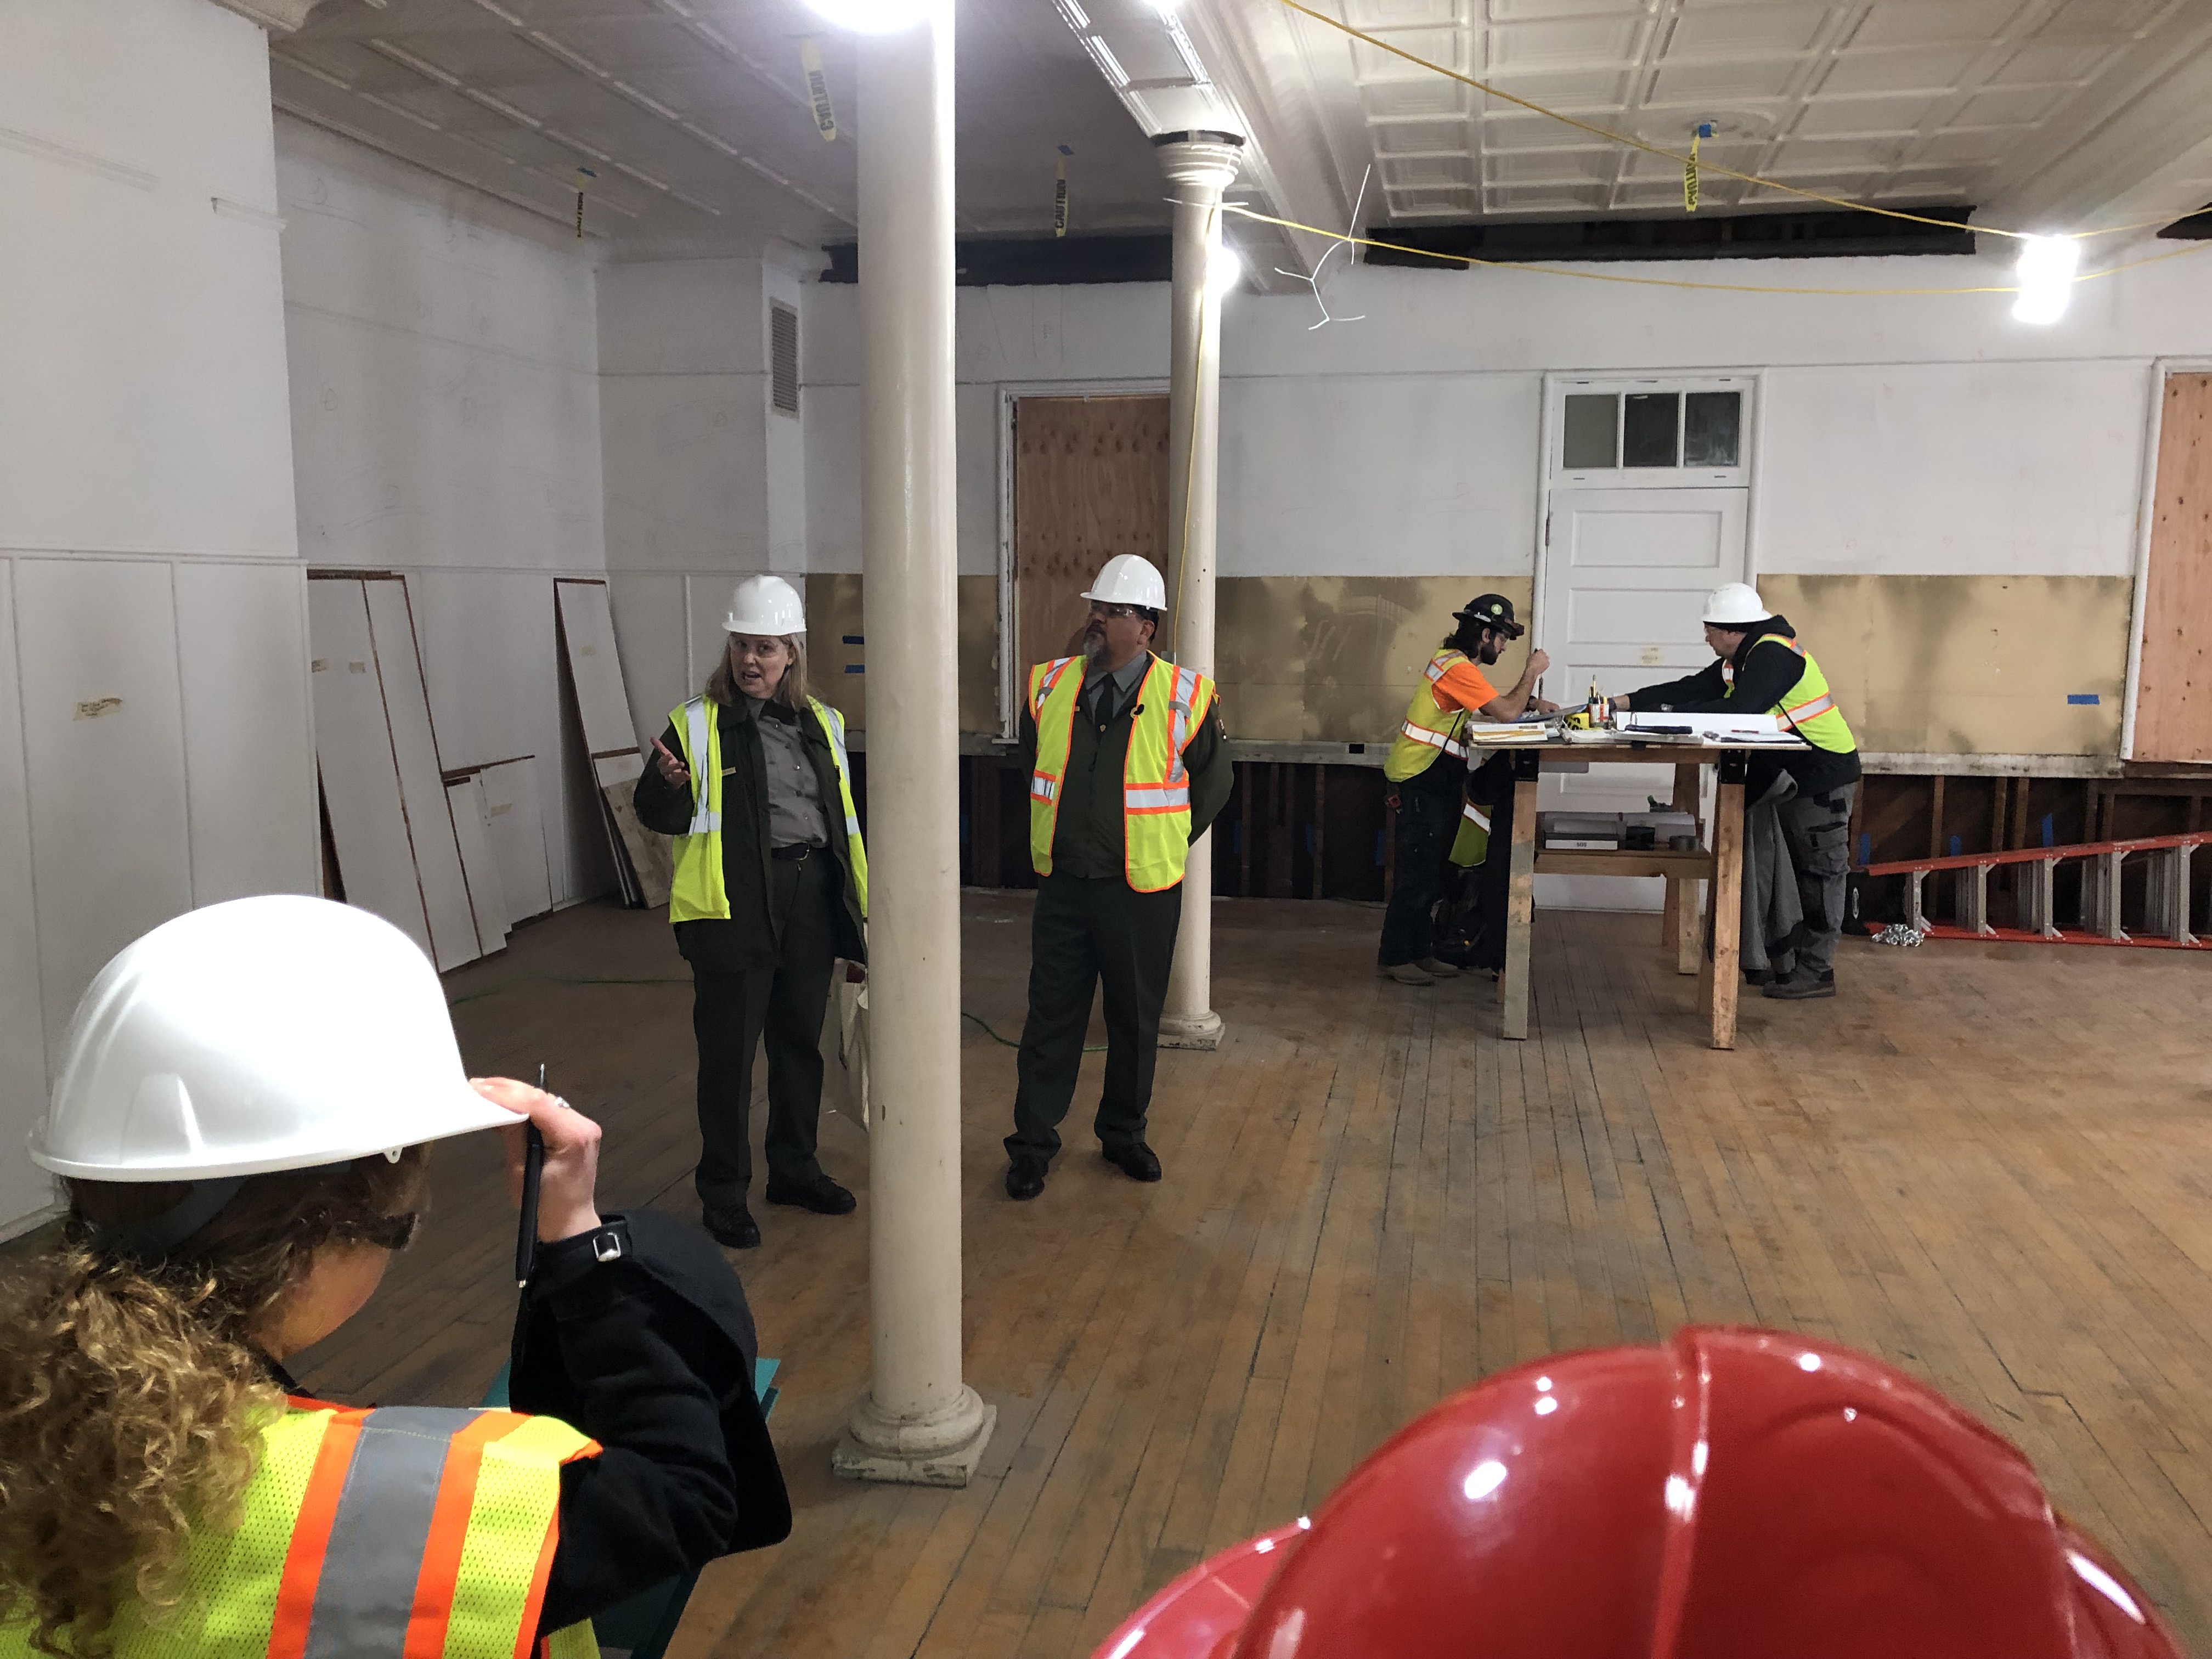 Six individuals stand around a room, four facing each other in conversation and two are standing at opposite ends of a table towards the back of the room. All are wearing hard hats, googles, and reflective vests.